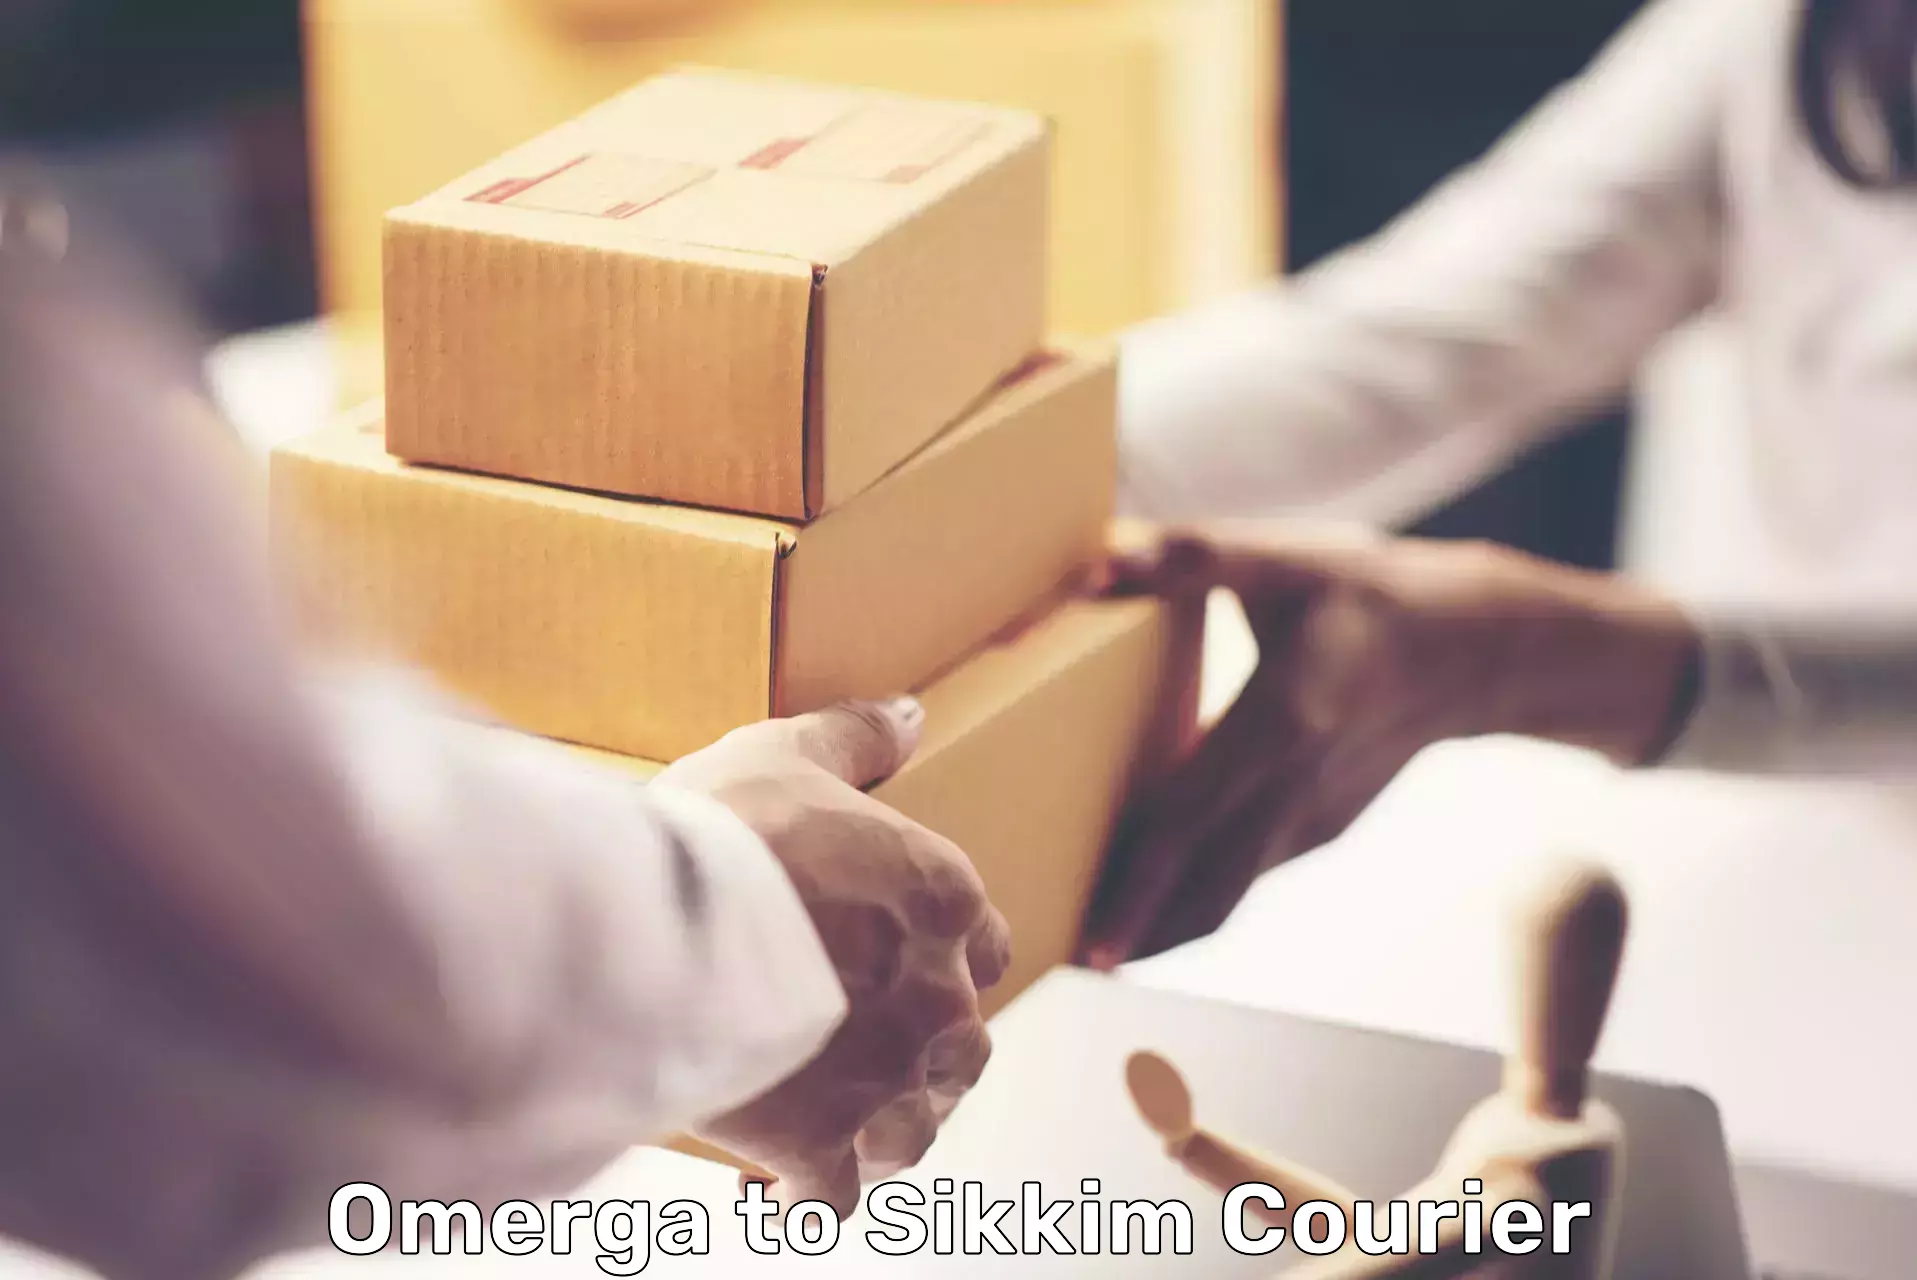 Efficient order fulfillment Omerga to South Sikkim